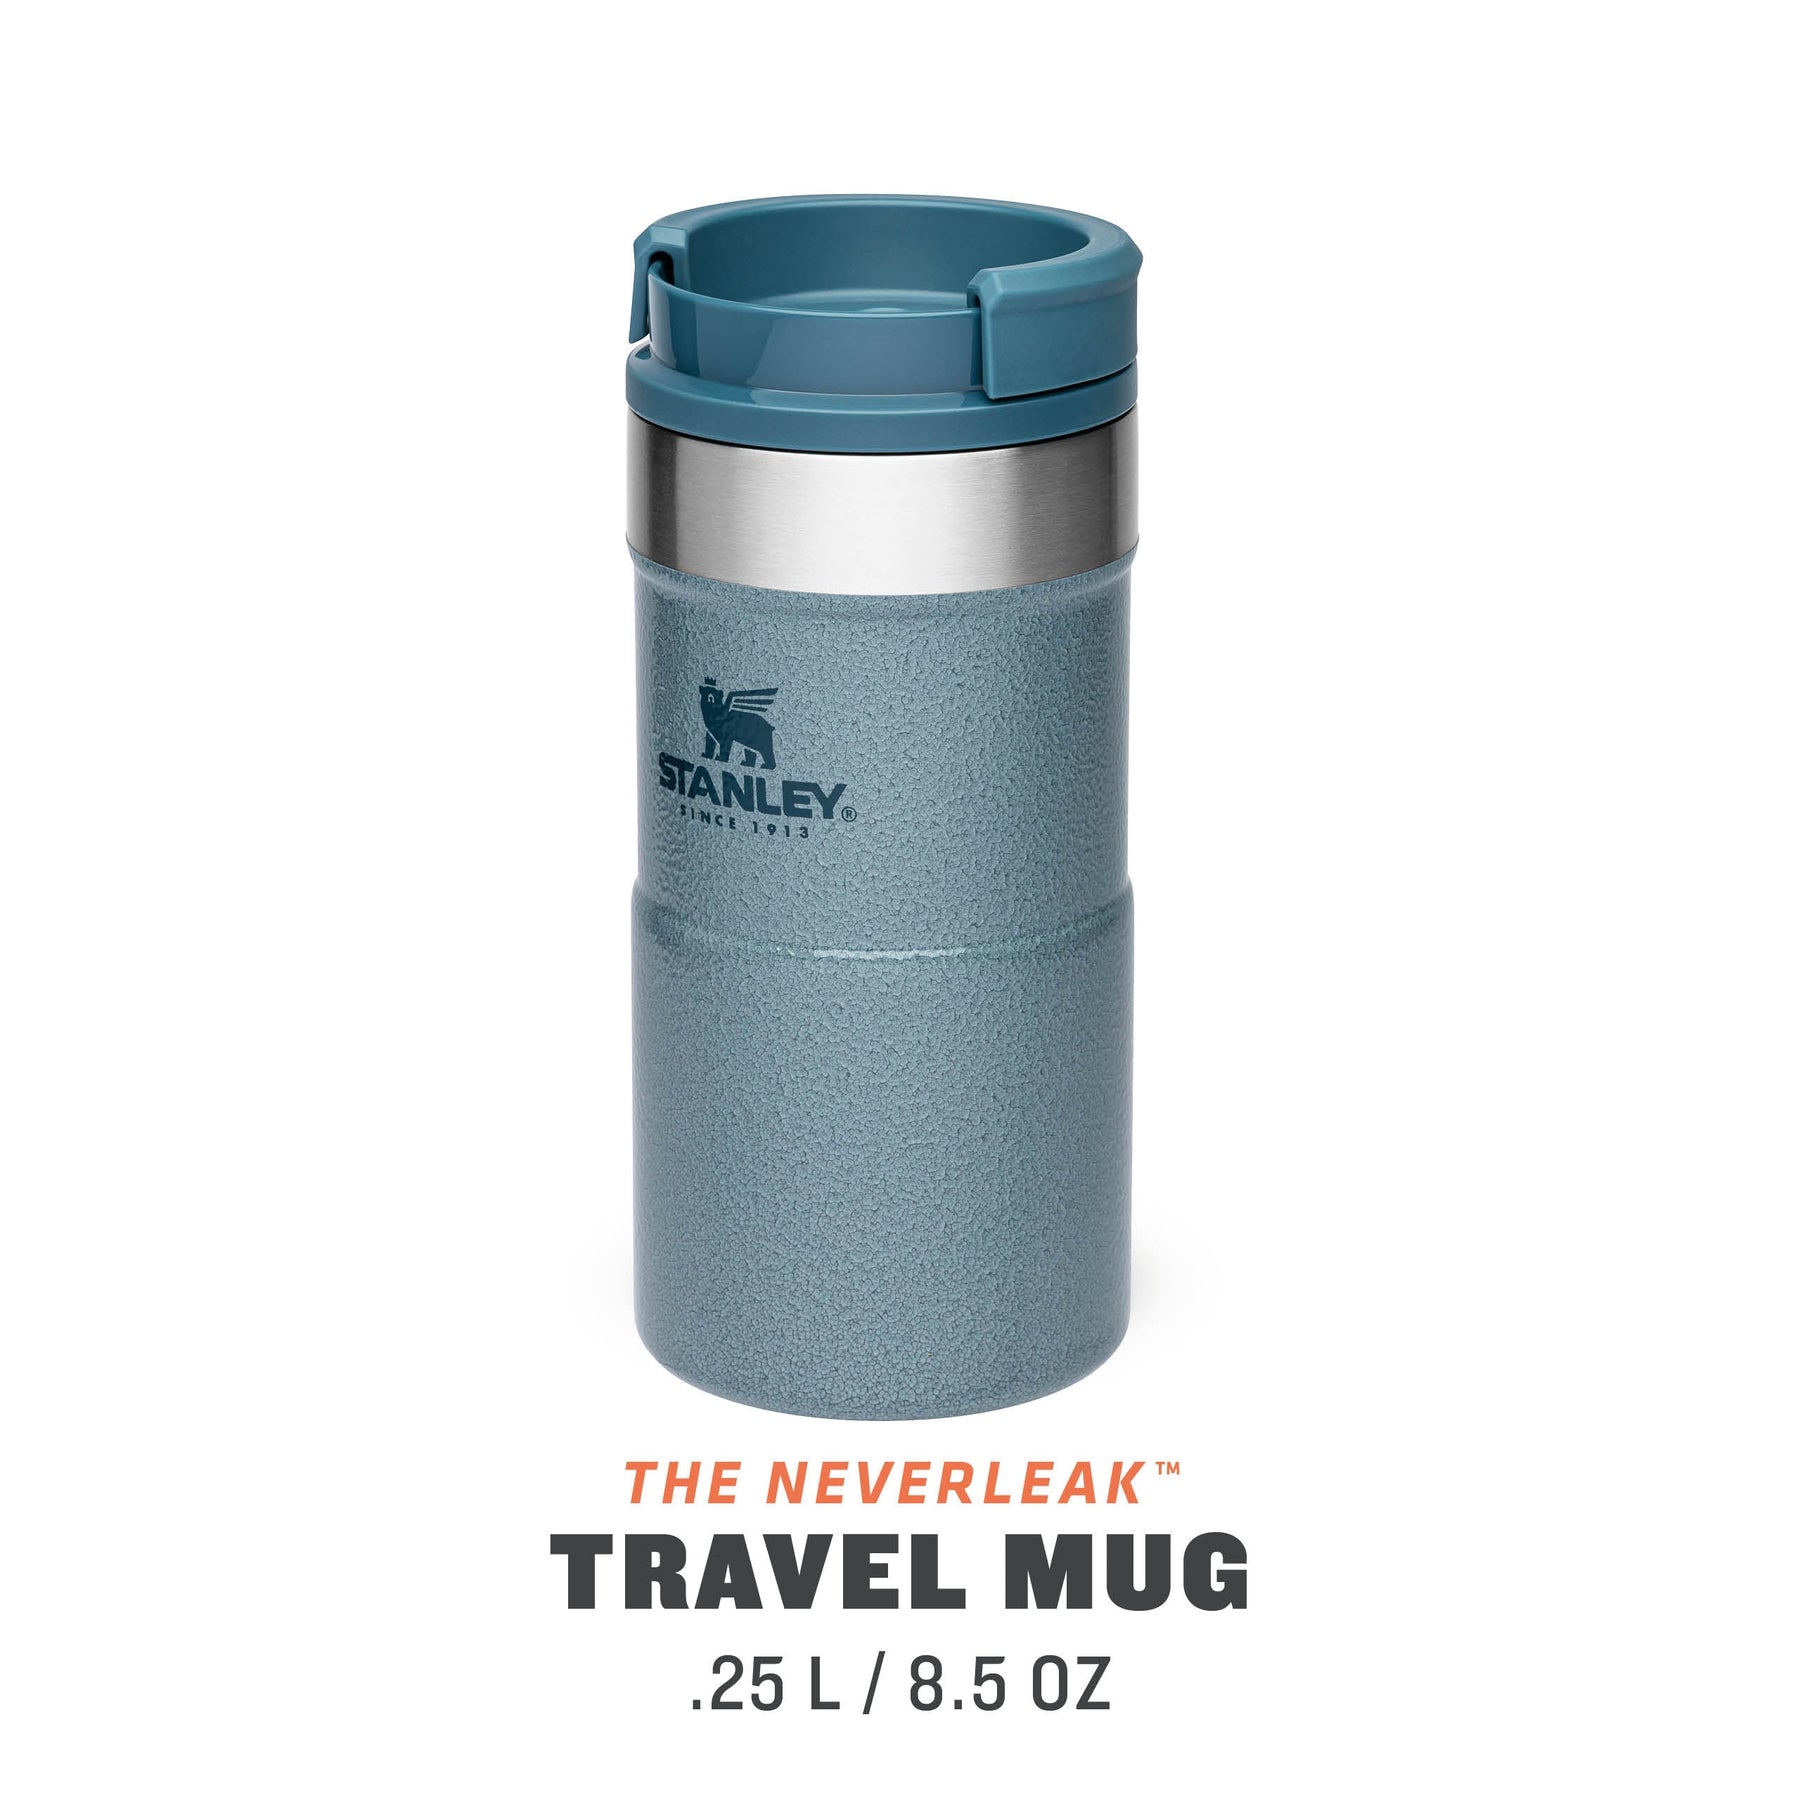 Stanley aerolight transit mug 0.47L. Available in store.. 6hrs